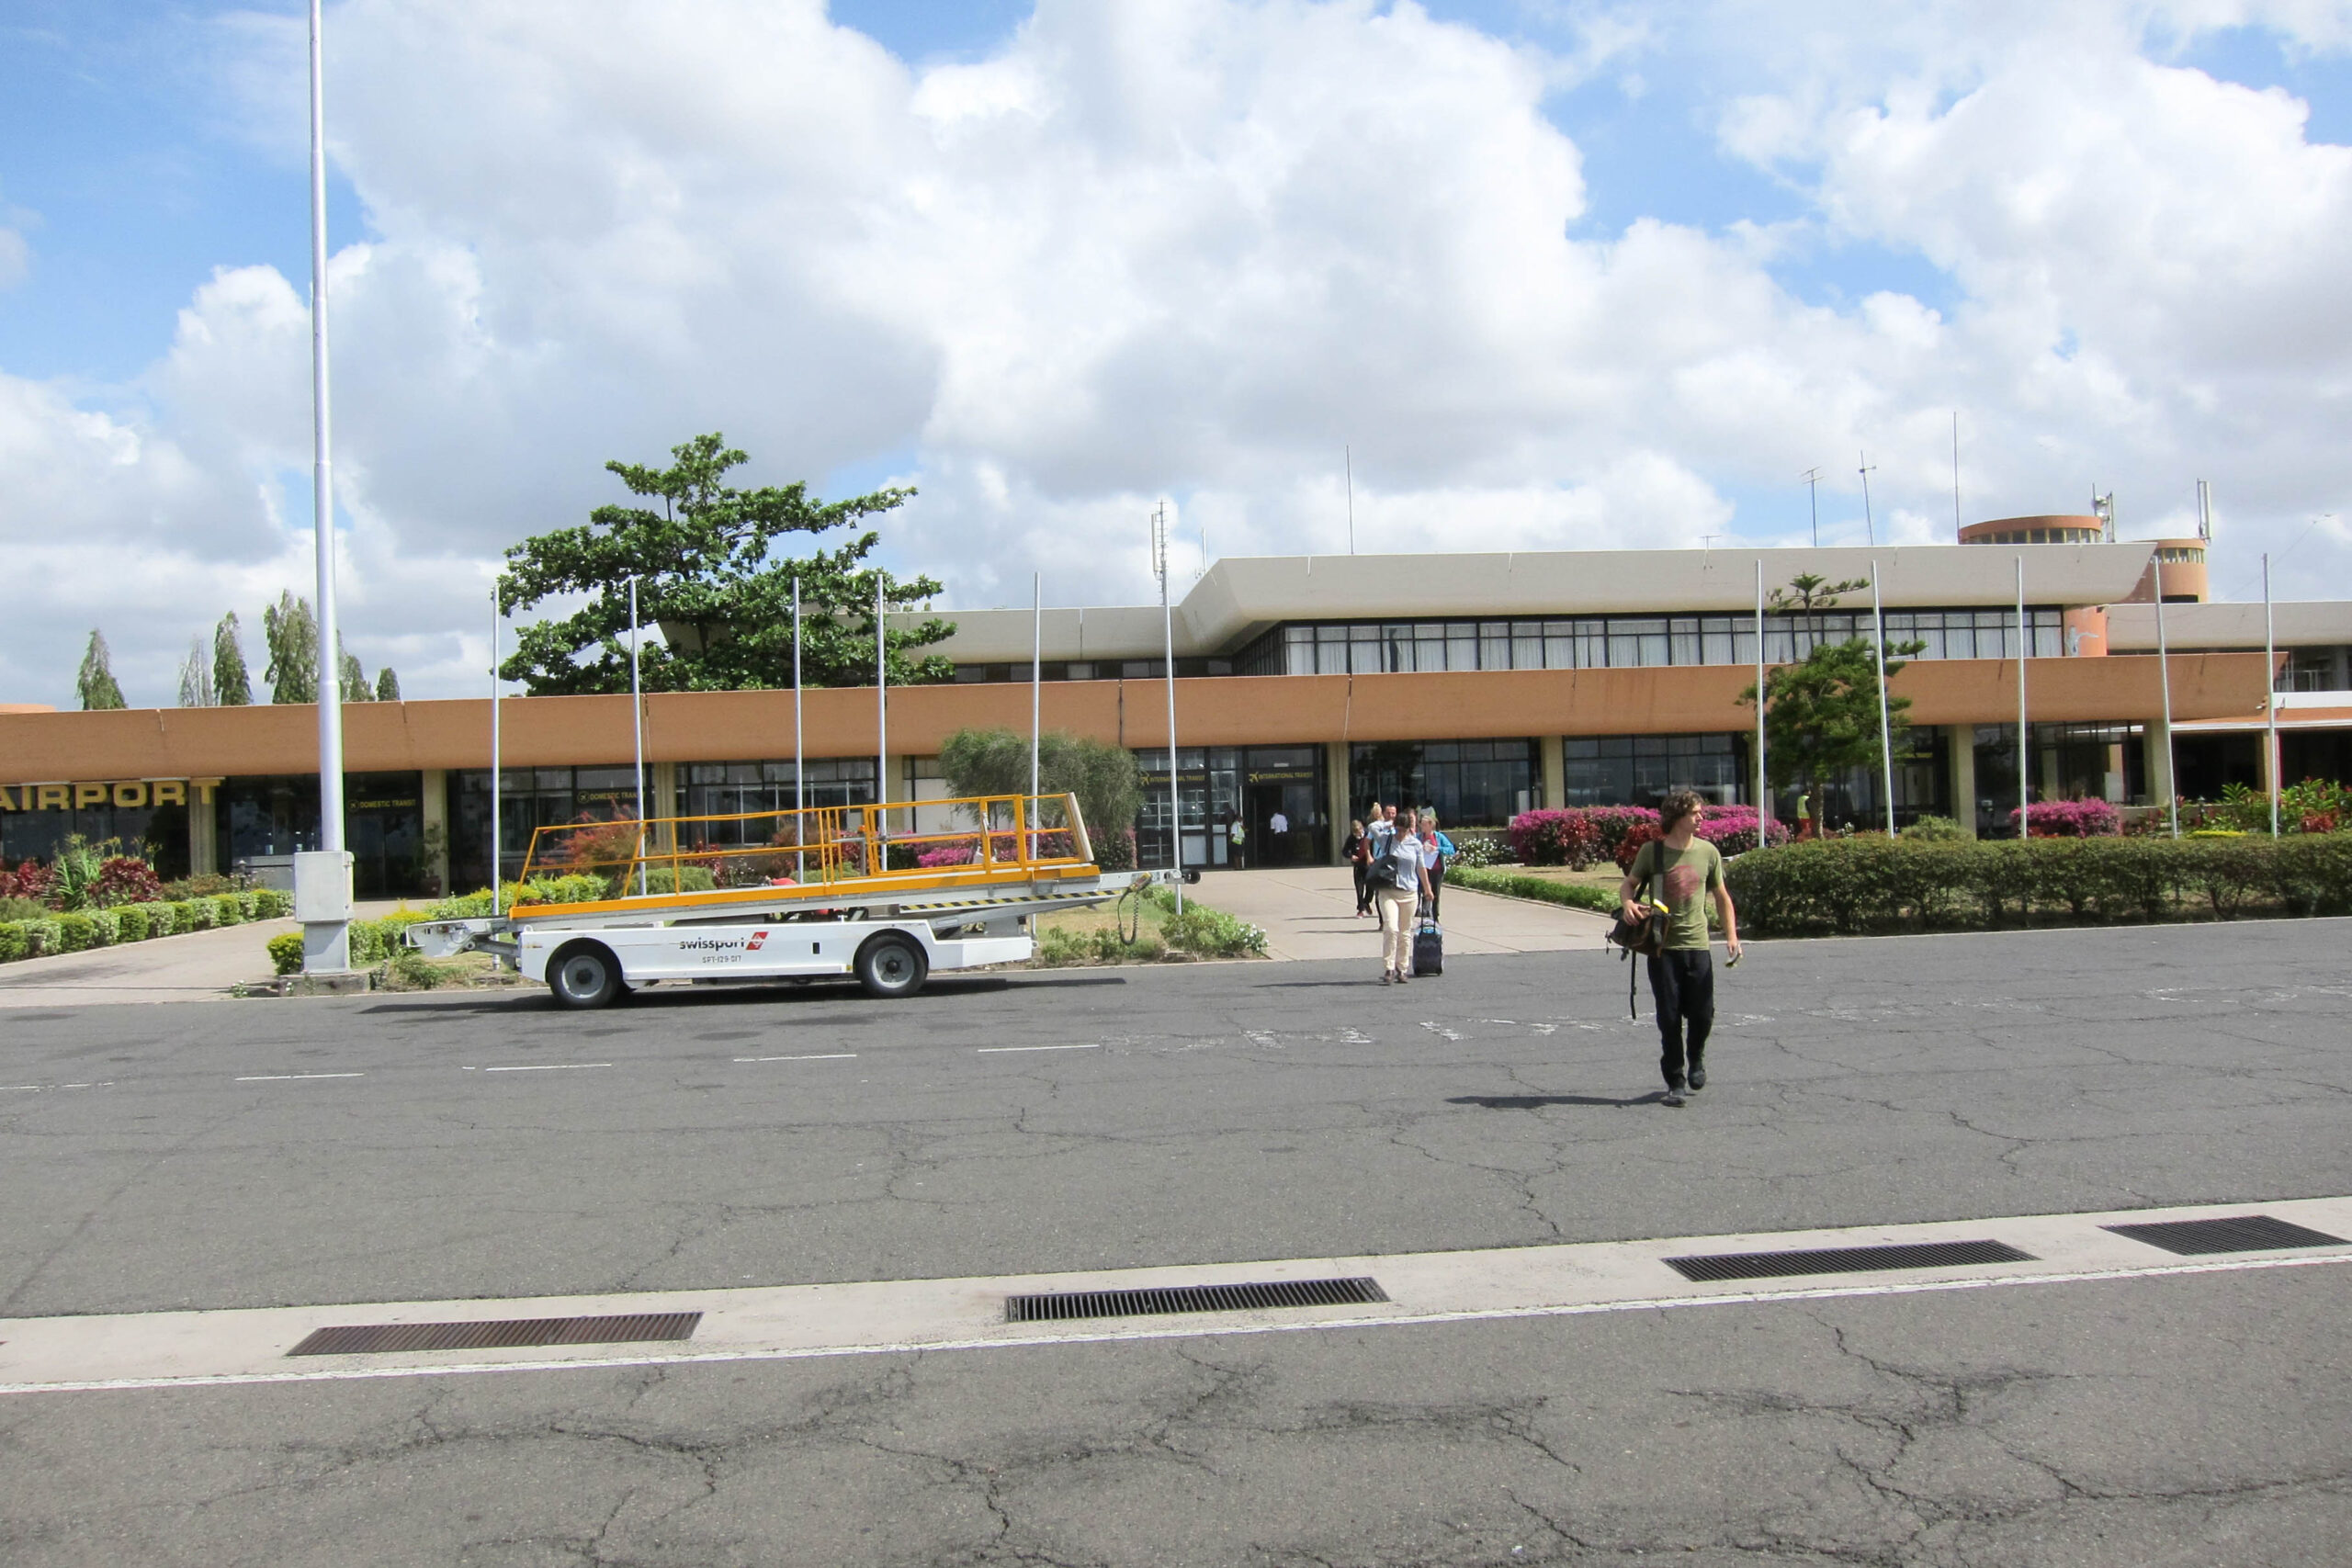 KADCO invests 2.7bn/- for KIA car parking lot as tourists flow surge